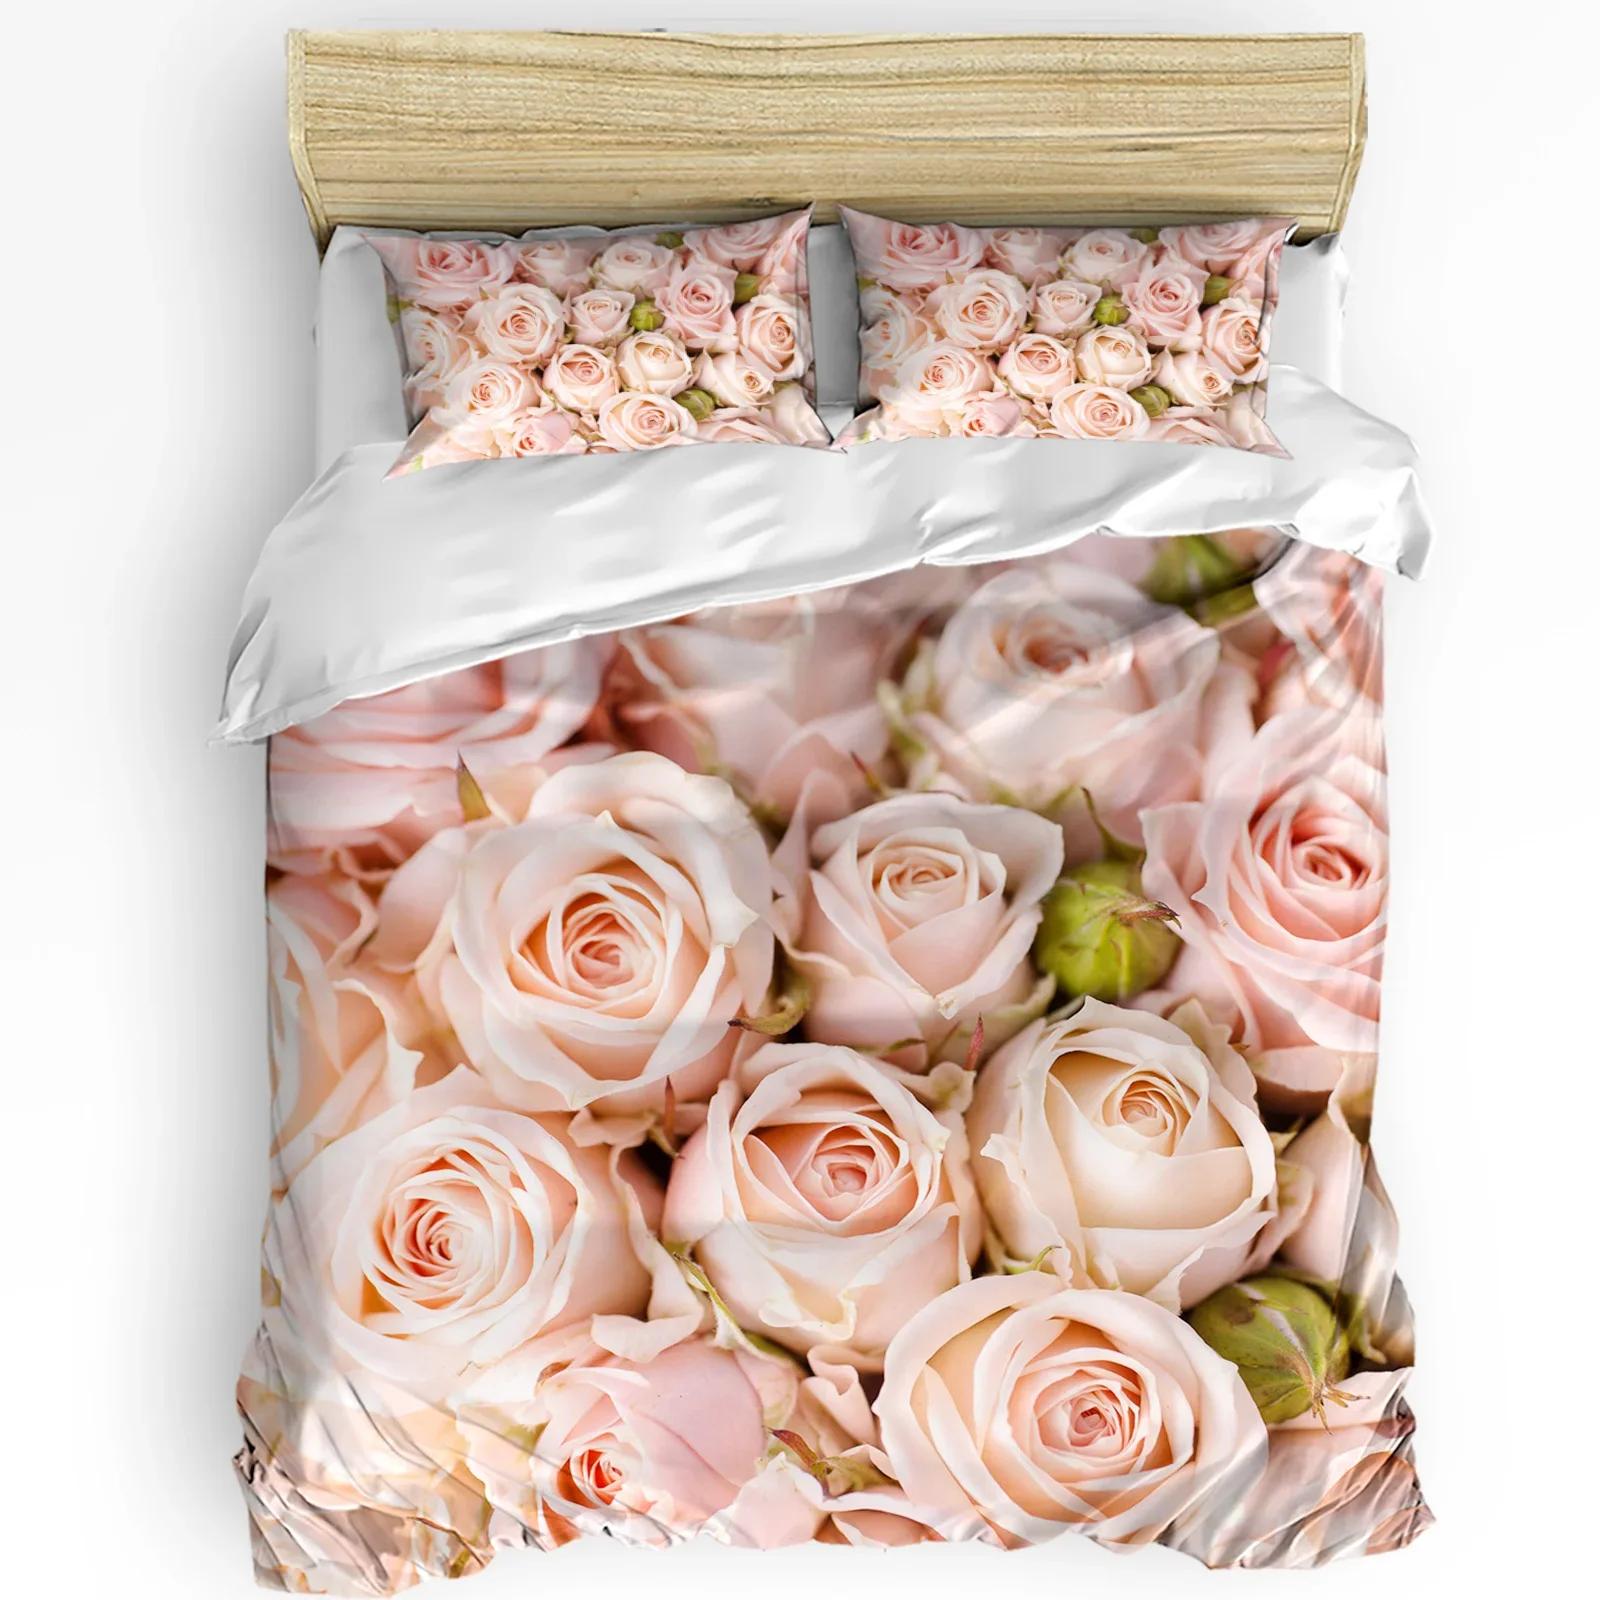 Roses Pink Flowers Duvet Cover Bed Bedding Set For Double Home Textile Quilt Cover Pillowcases Bedroom Bedding Set (